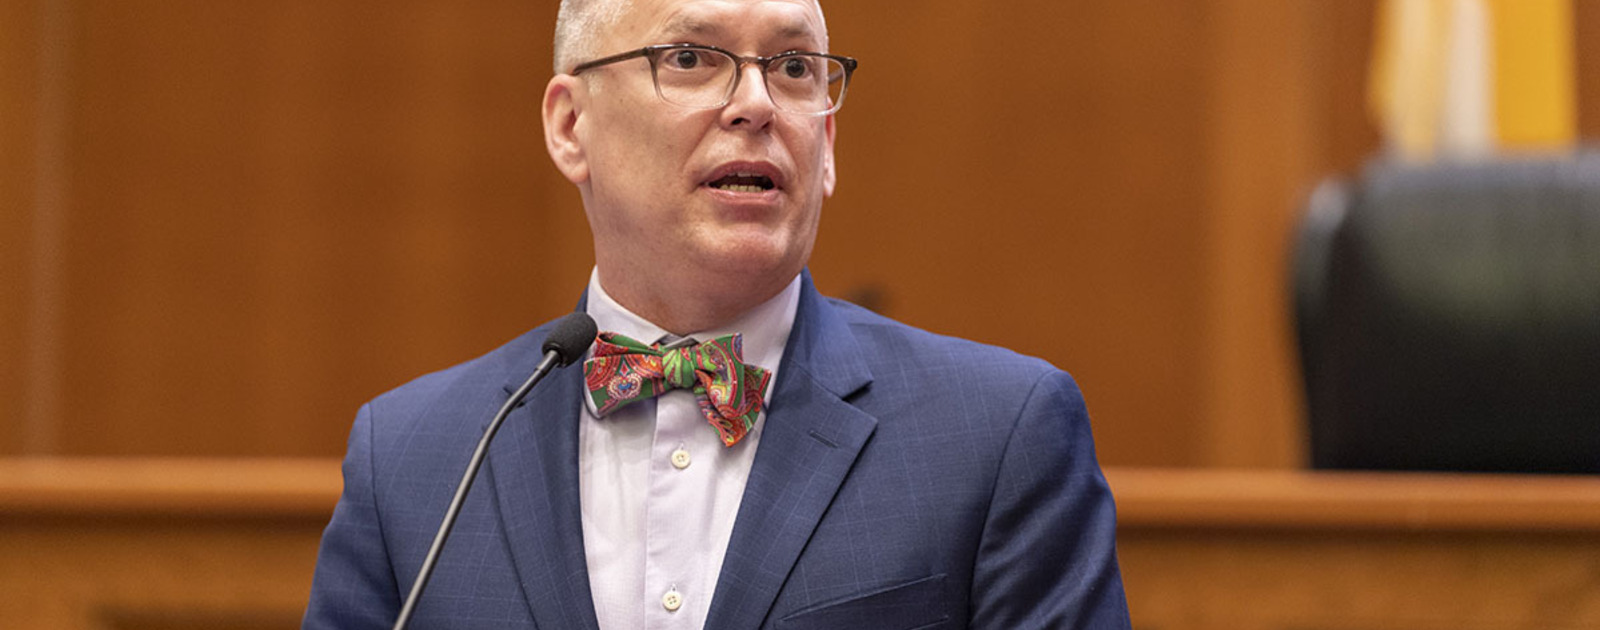 Plaintiffs from Obergefell v. Hodges speak about marriage equality case |  News | The Law School | University of Notre Dame